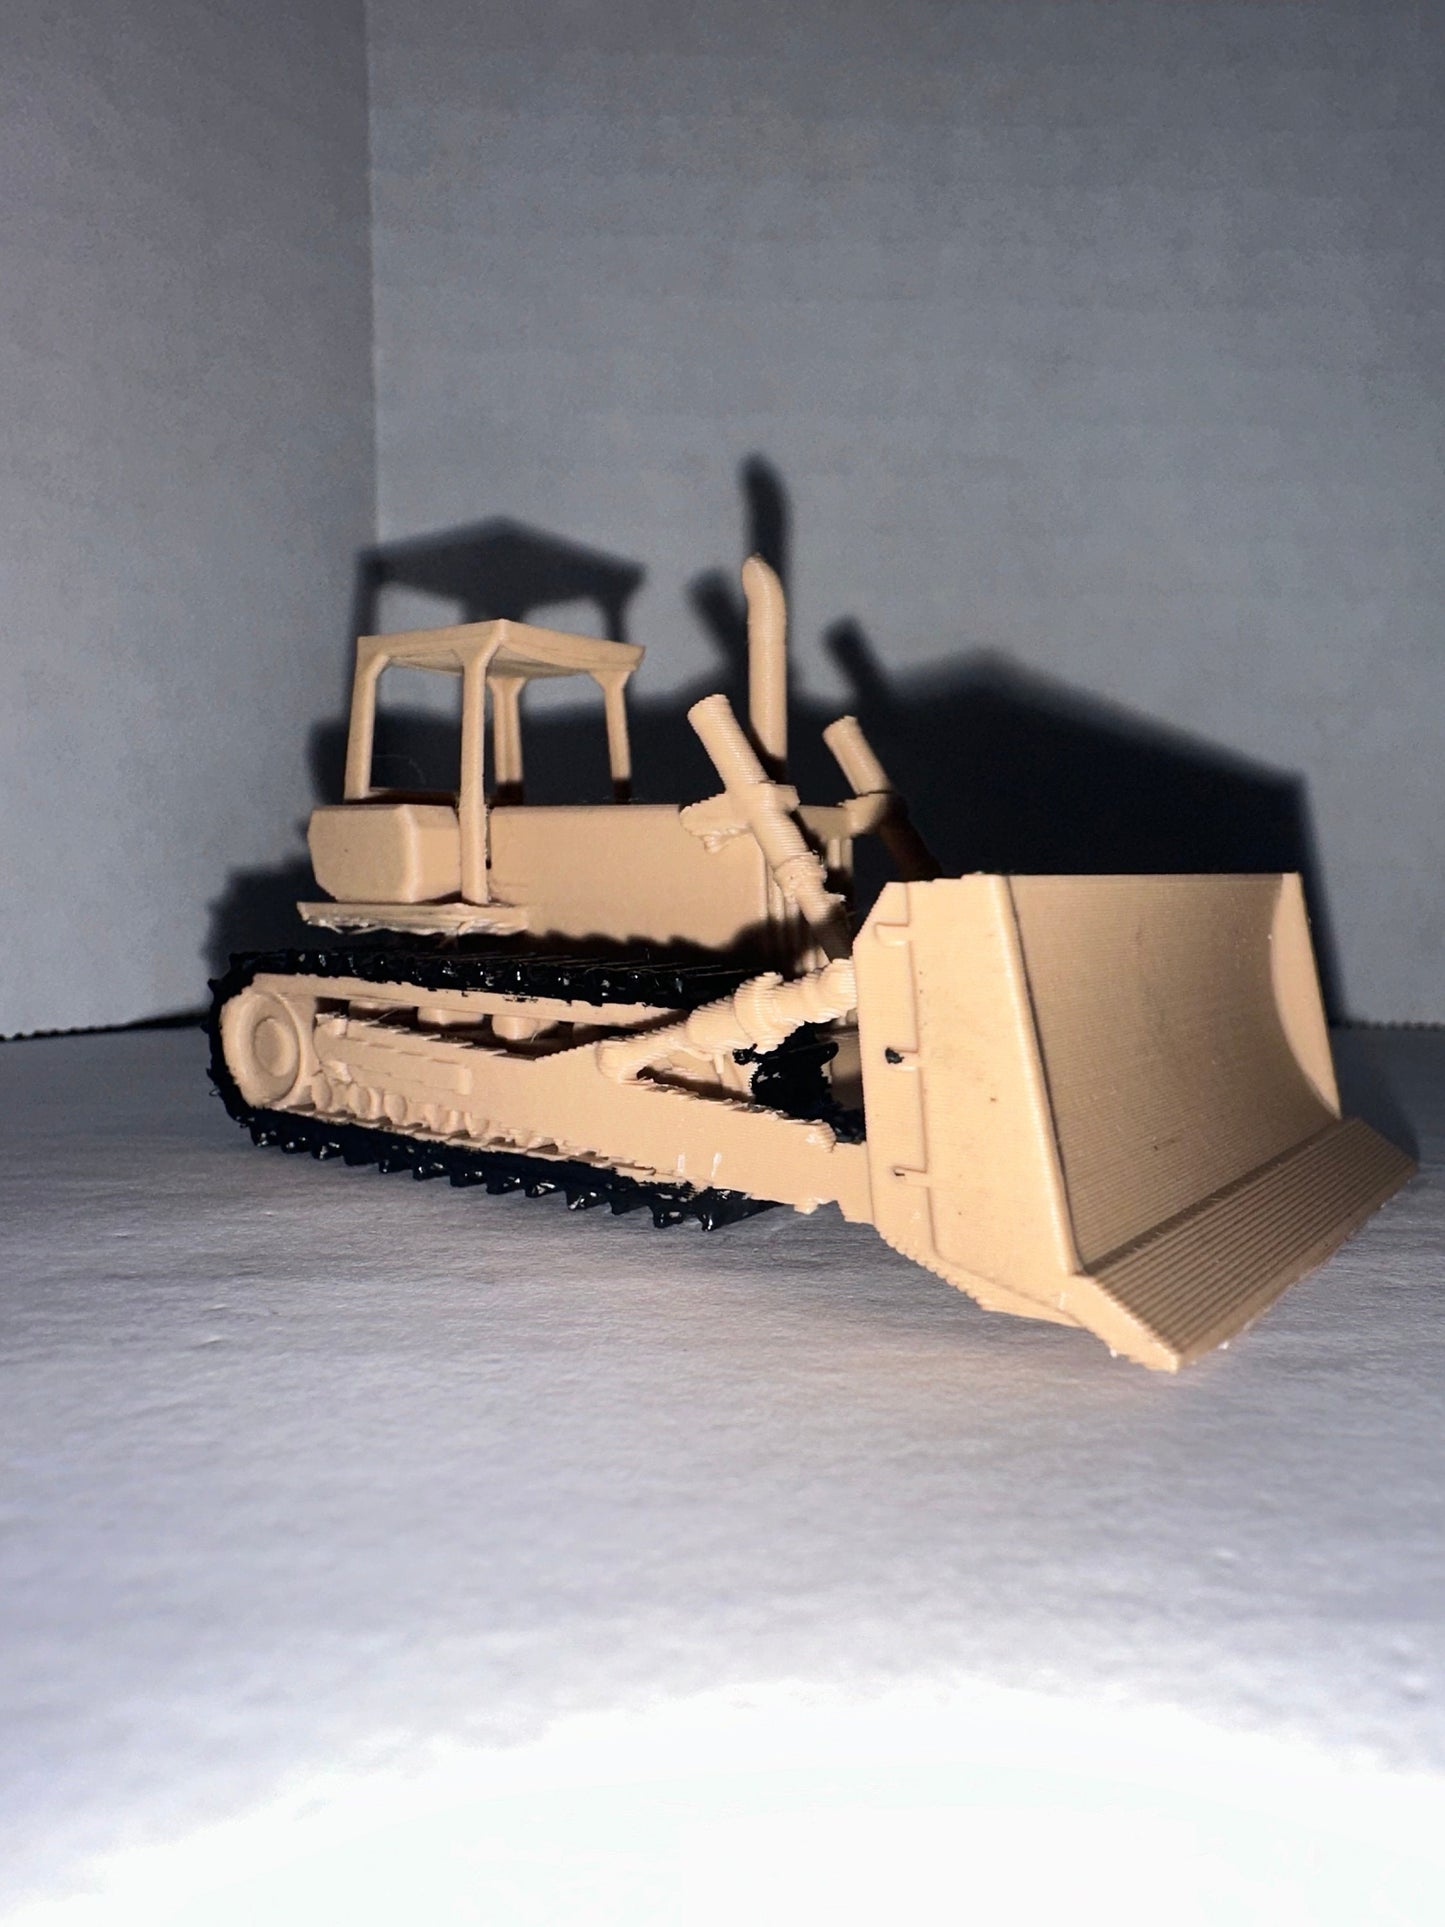 HO Scale Bulldozer for 1/87 Train Set Background Vehicle / Construction Equipment 1:87 Scale Truck / Diorama